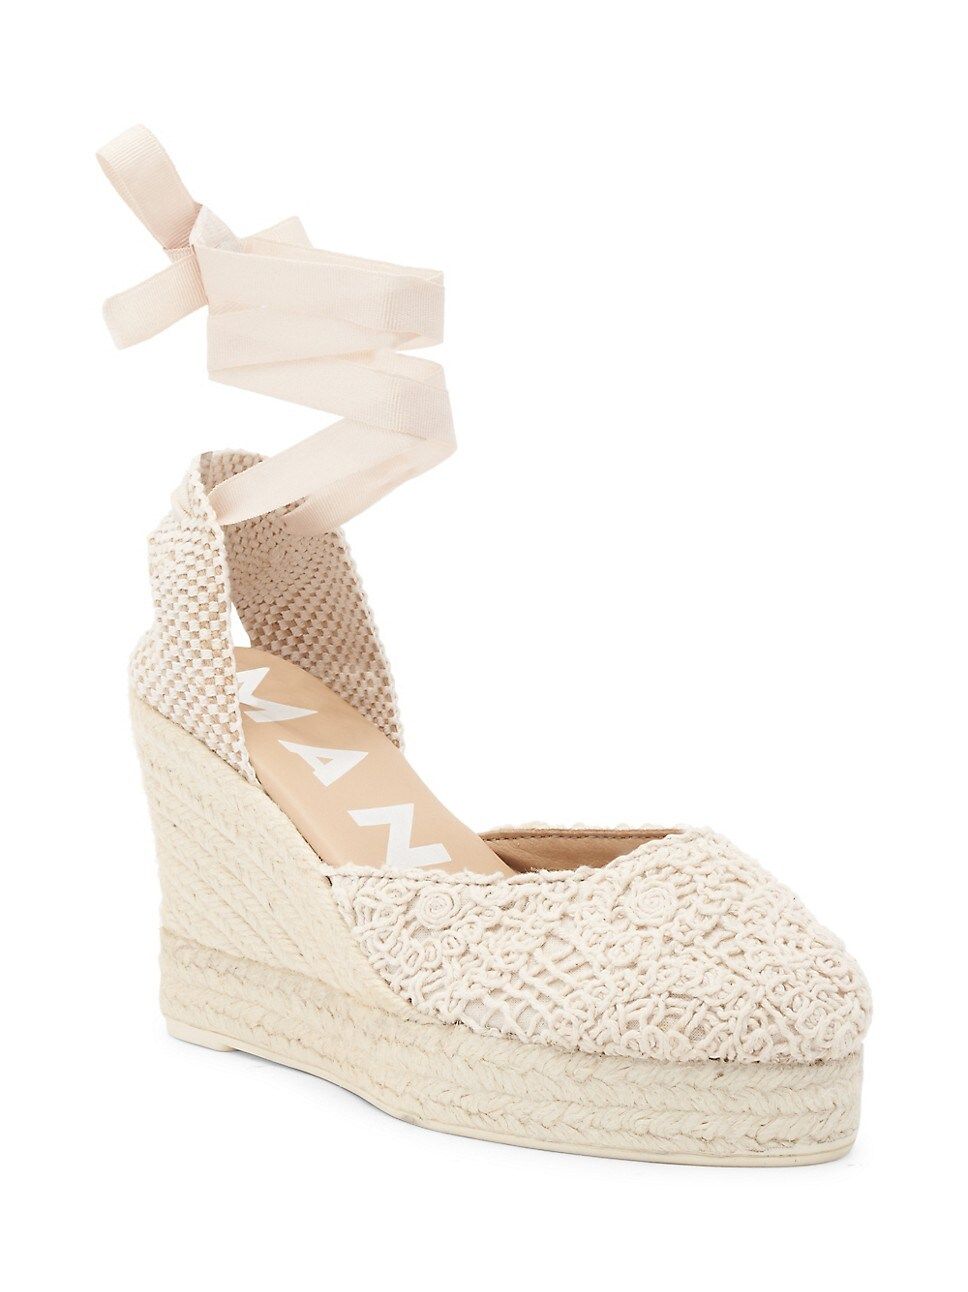 Crocheted Espadrille Lace-Up Wedges | Saks Fifth Avenue